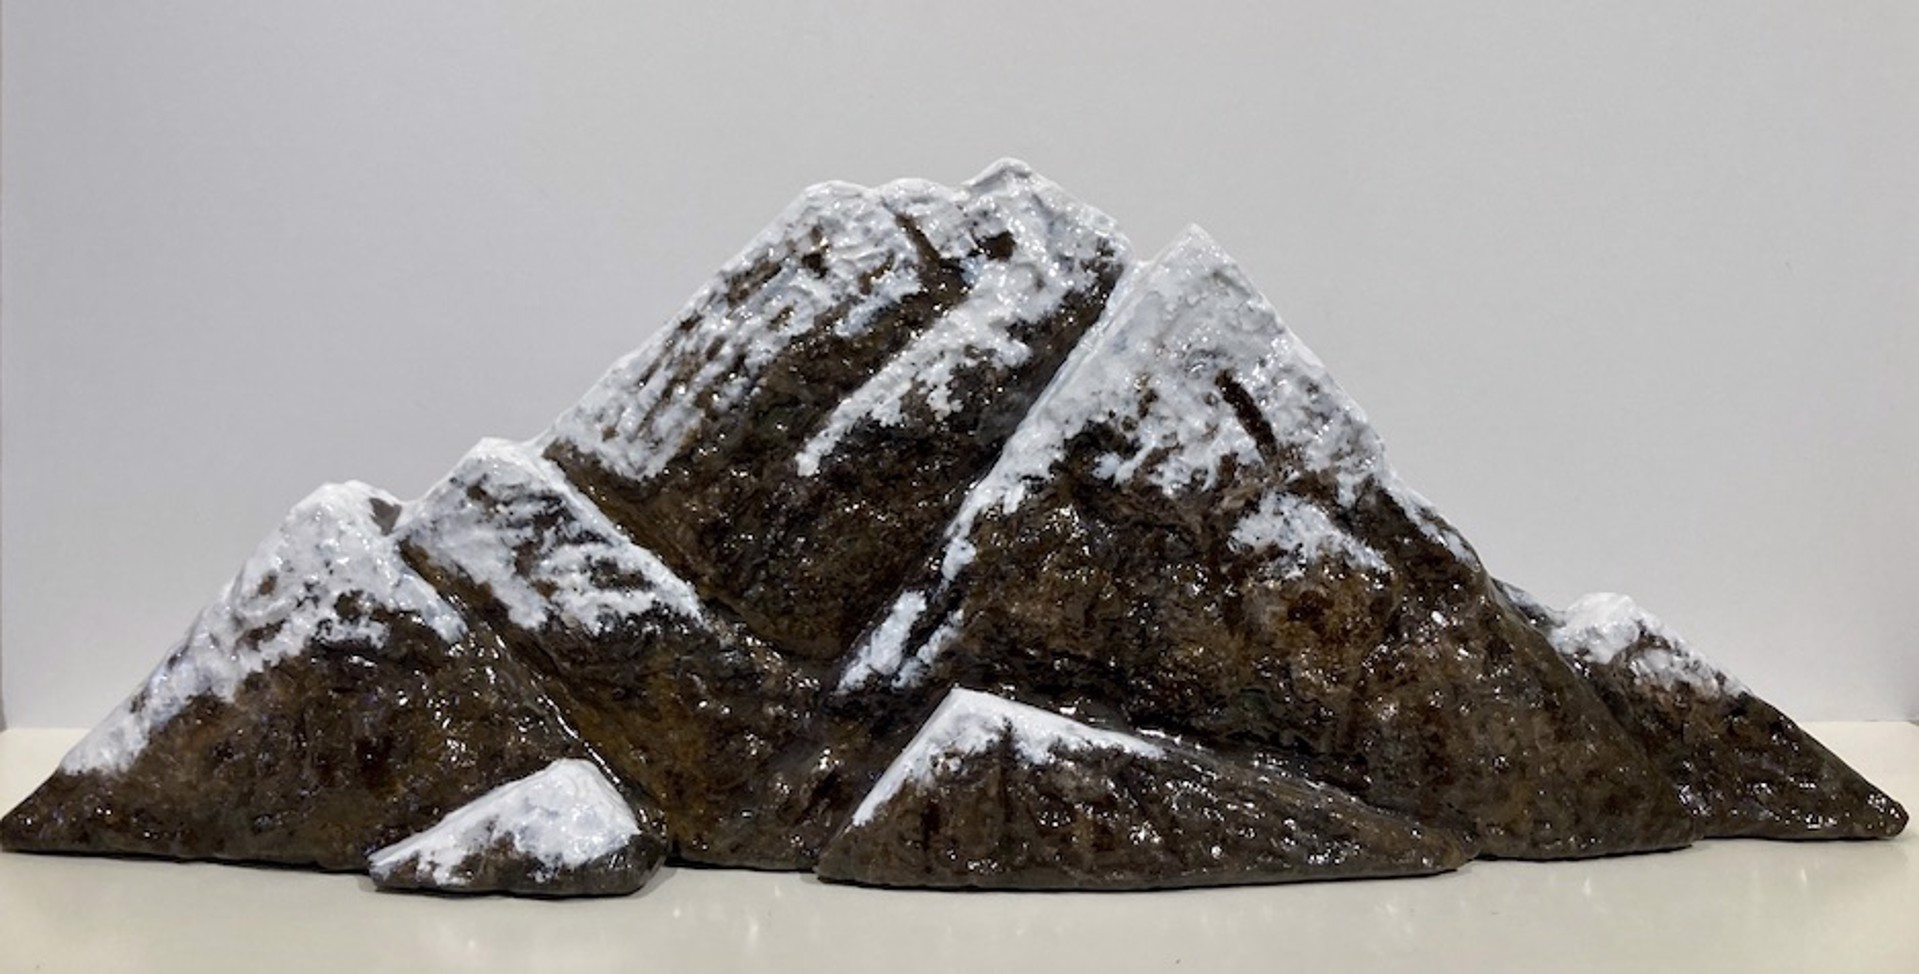 Solid Mountains 5 by Allan Waidman